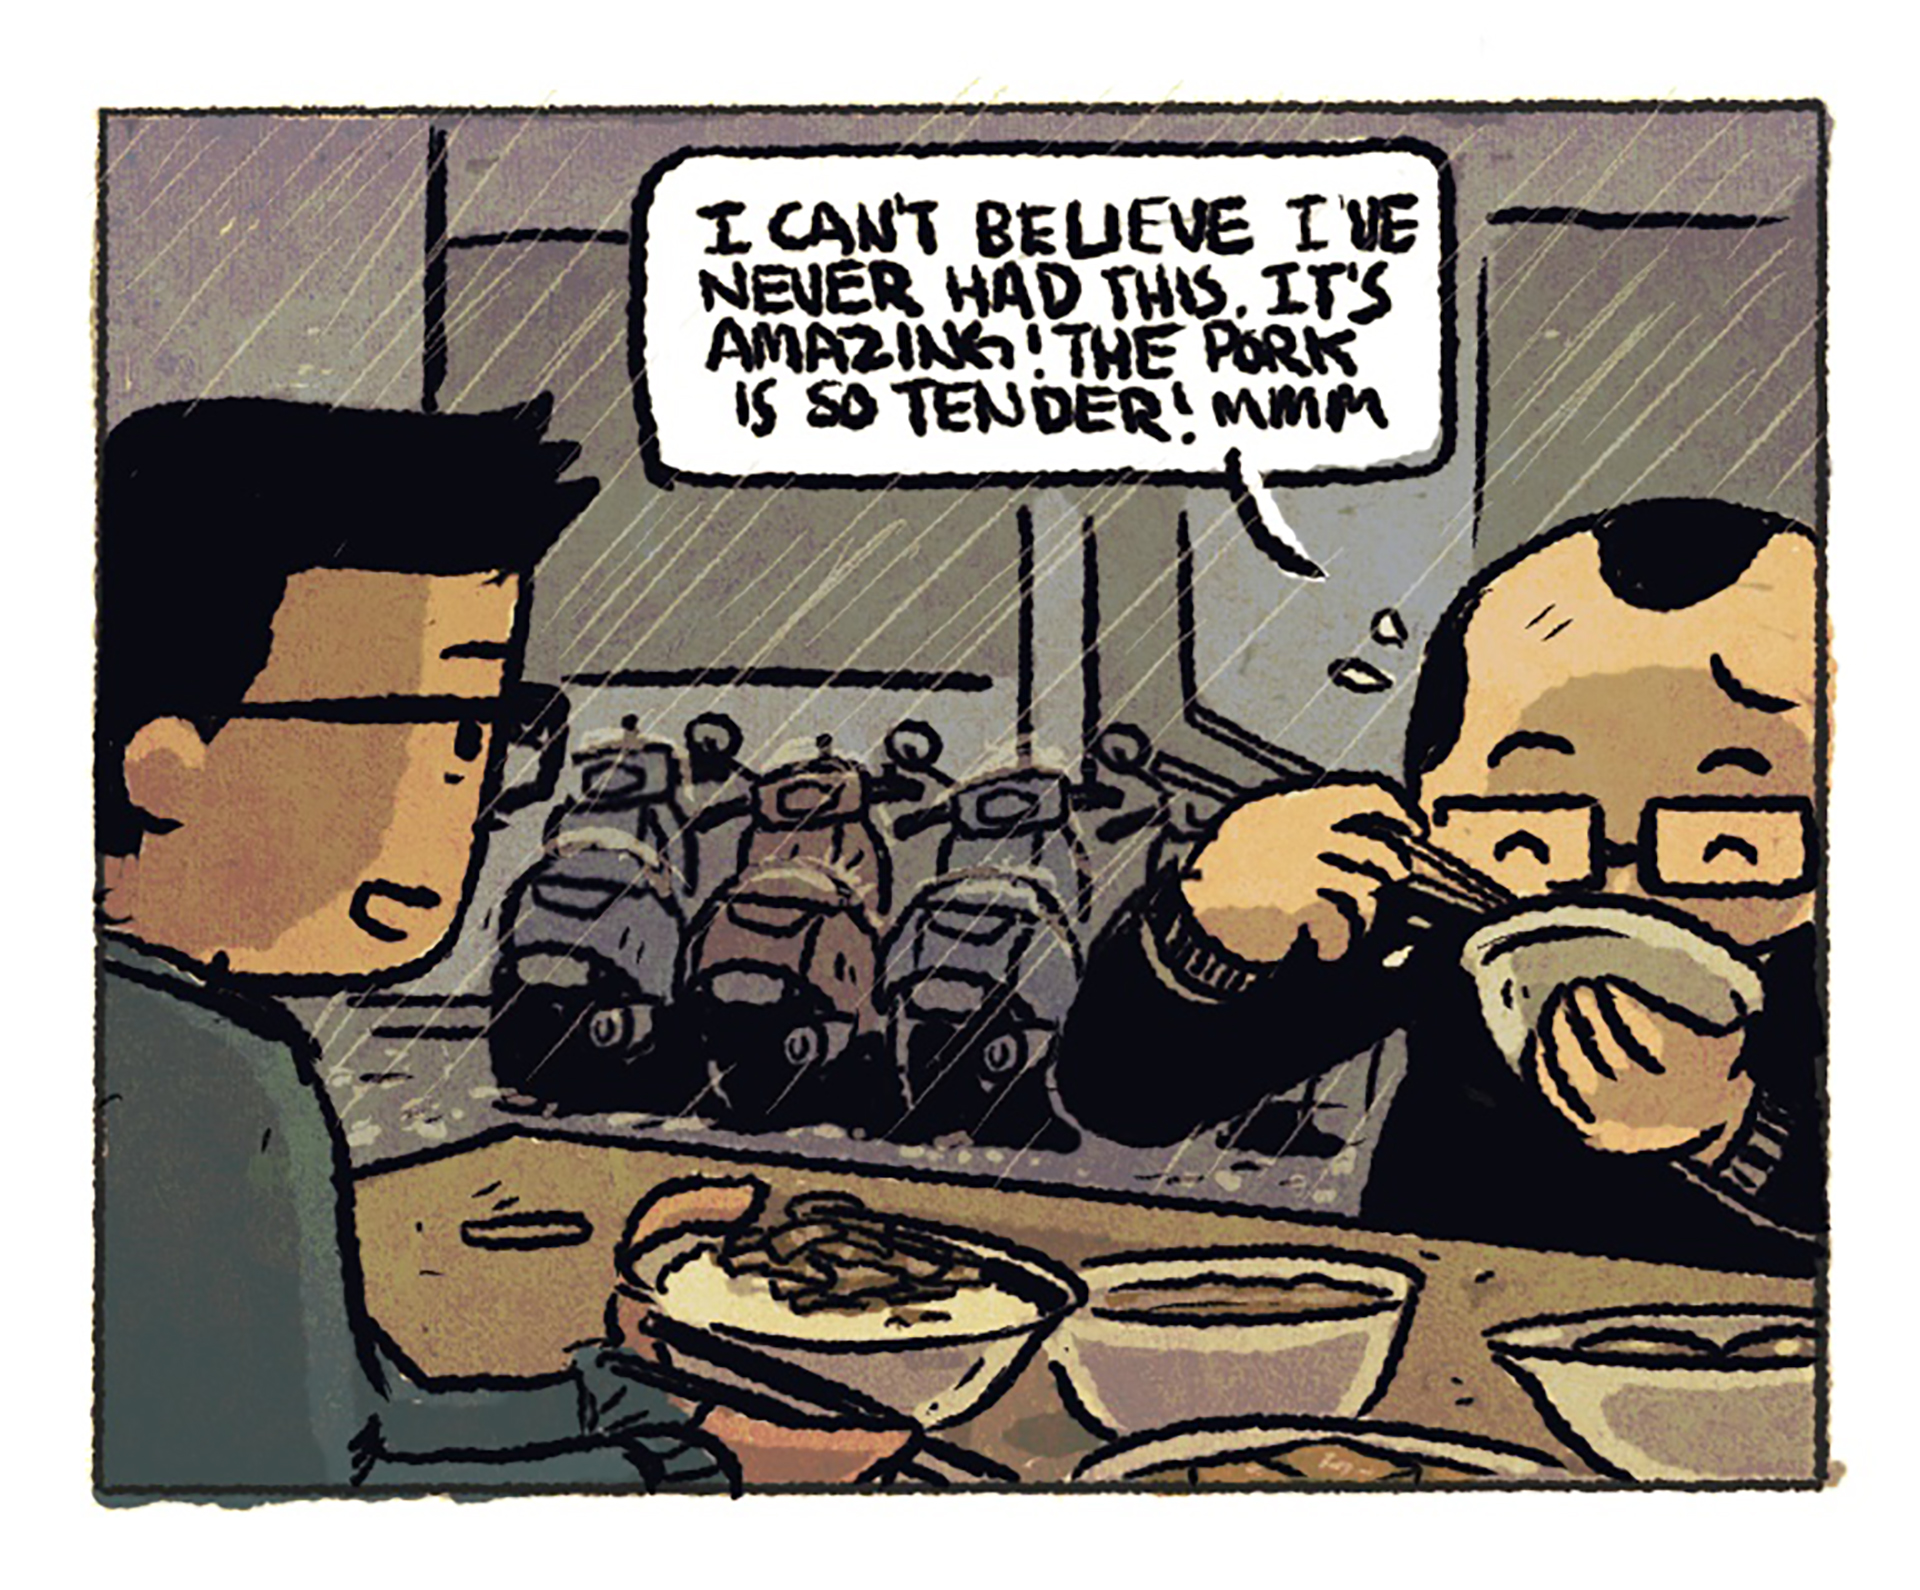 The two protagonists, both bespectacled men, sit at a table devouring their lu rou fan, chopsticks in hand. Speech bubble: "I can't believe I've never had this. It's amazing! The pork is so tender! Mmm"